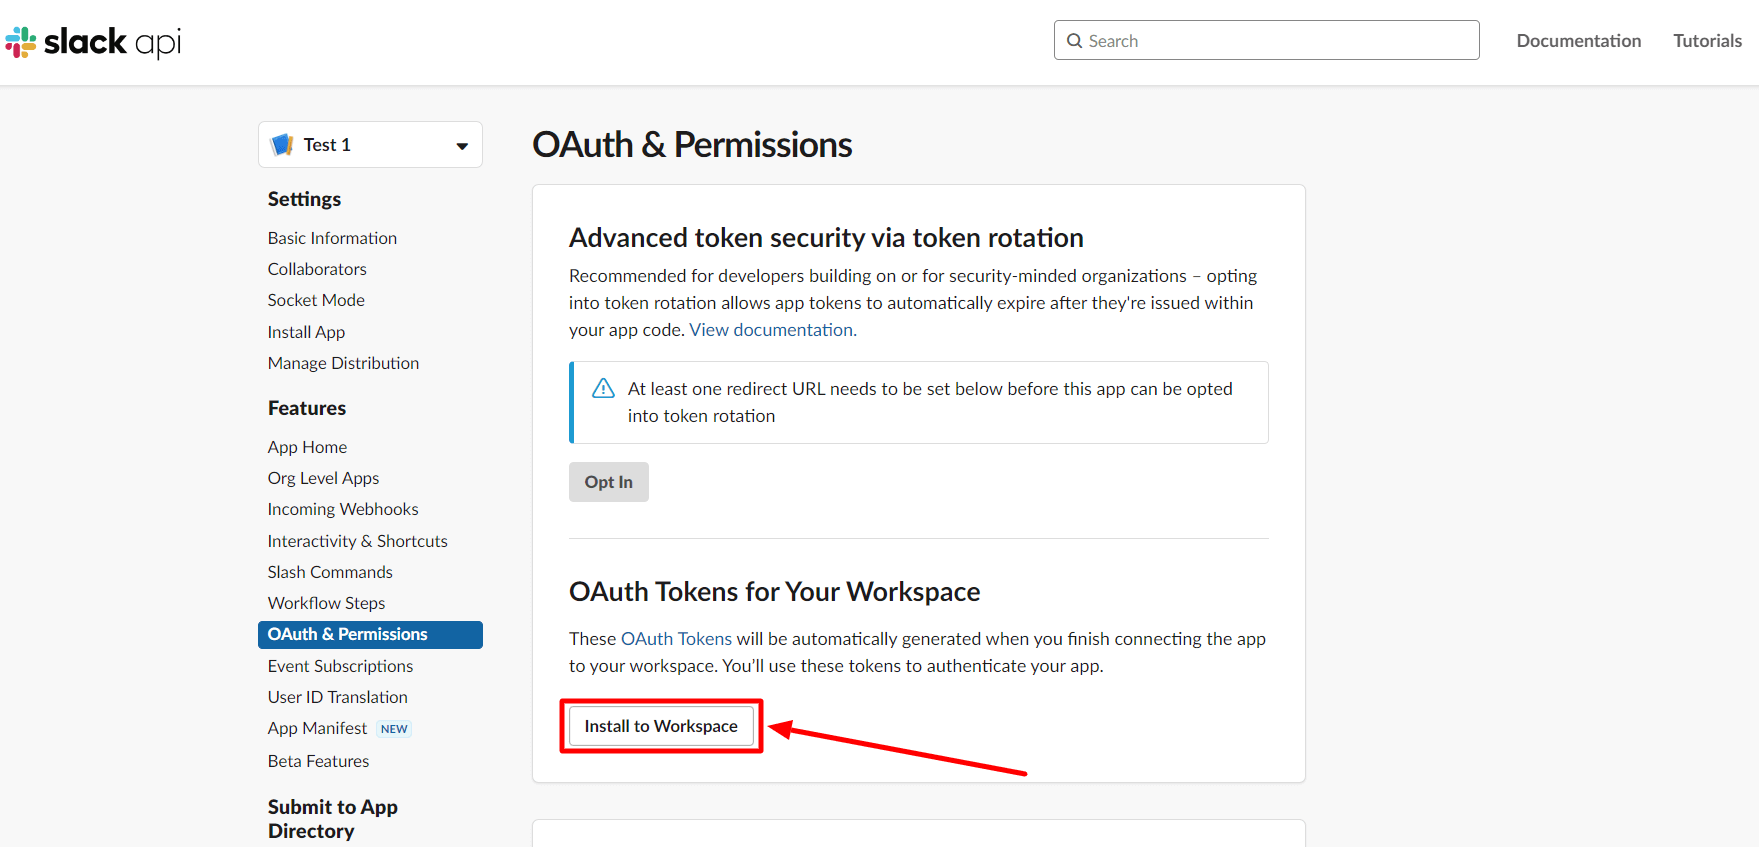 Install to Workspace - OAuth & Permissions - Slack API